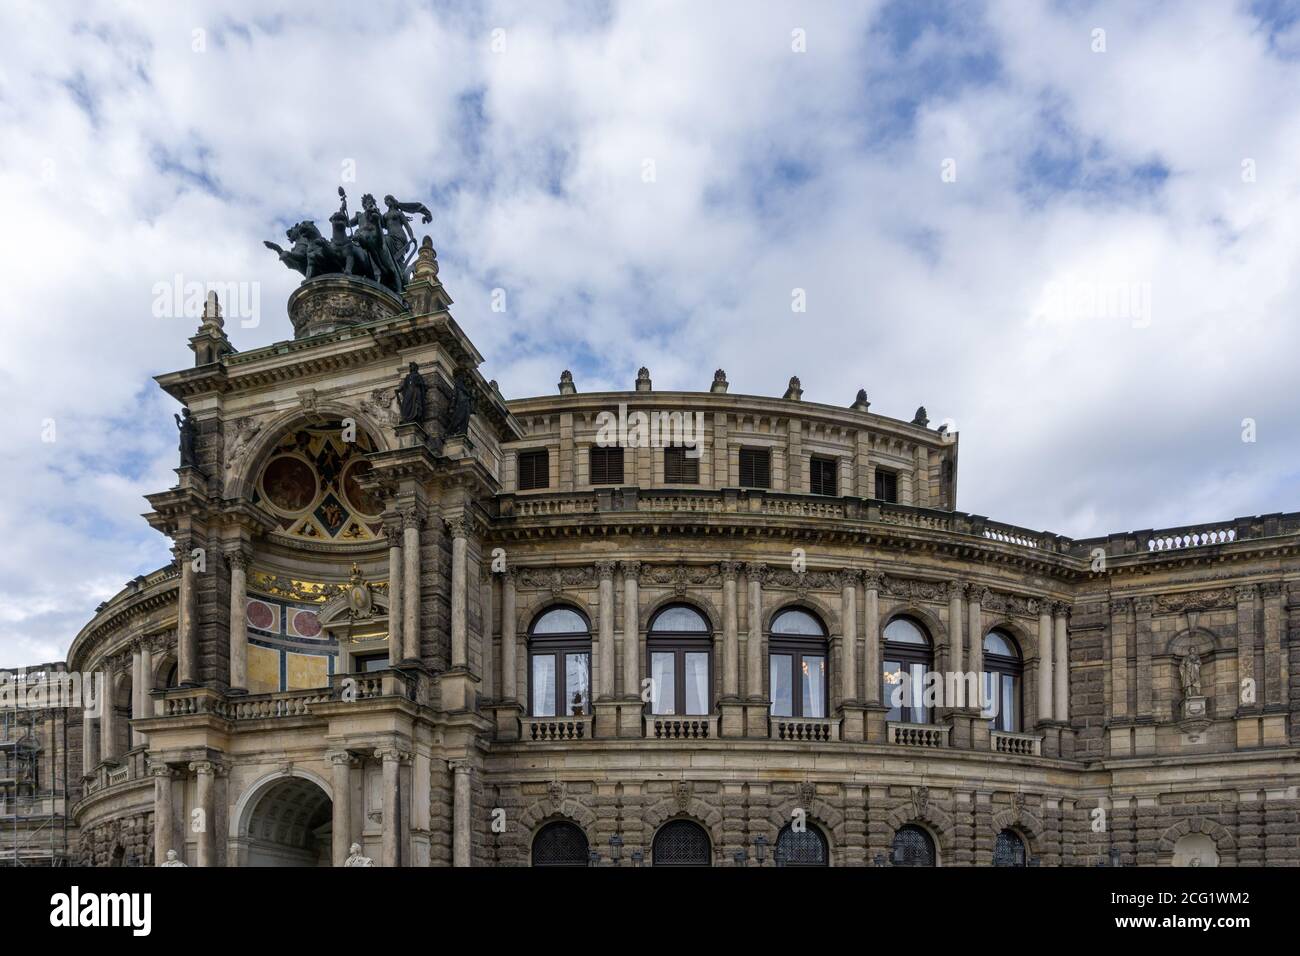 Dresden, Saxony / Germany - 3 September 2020: the Semperoper building in Dresden with the Quadriga above the entrance Stock Photo